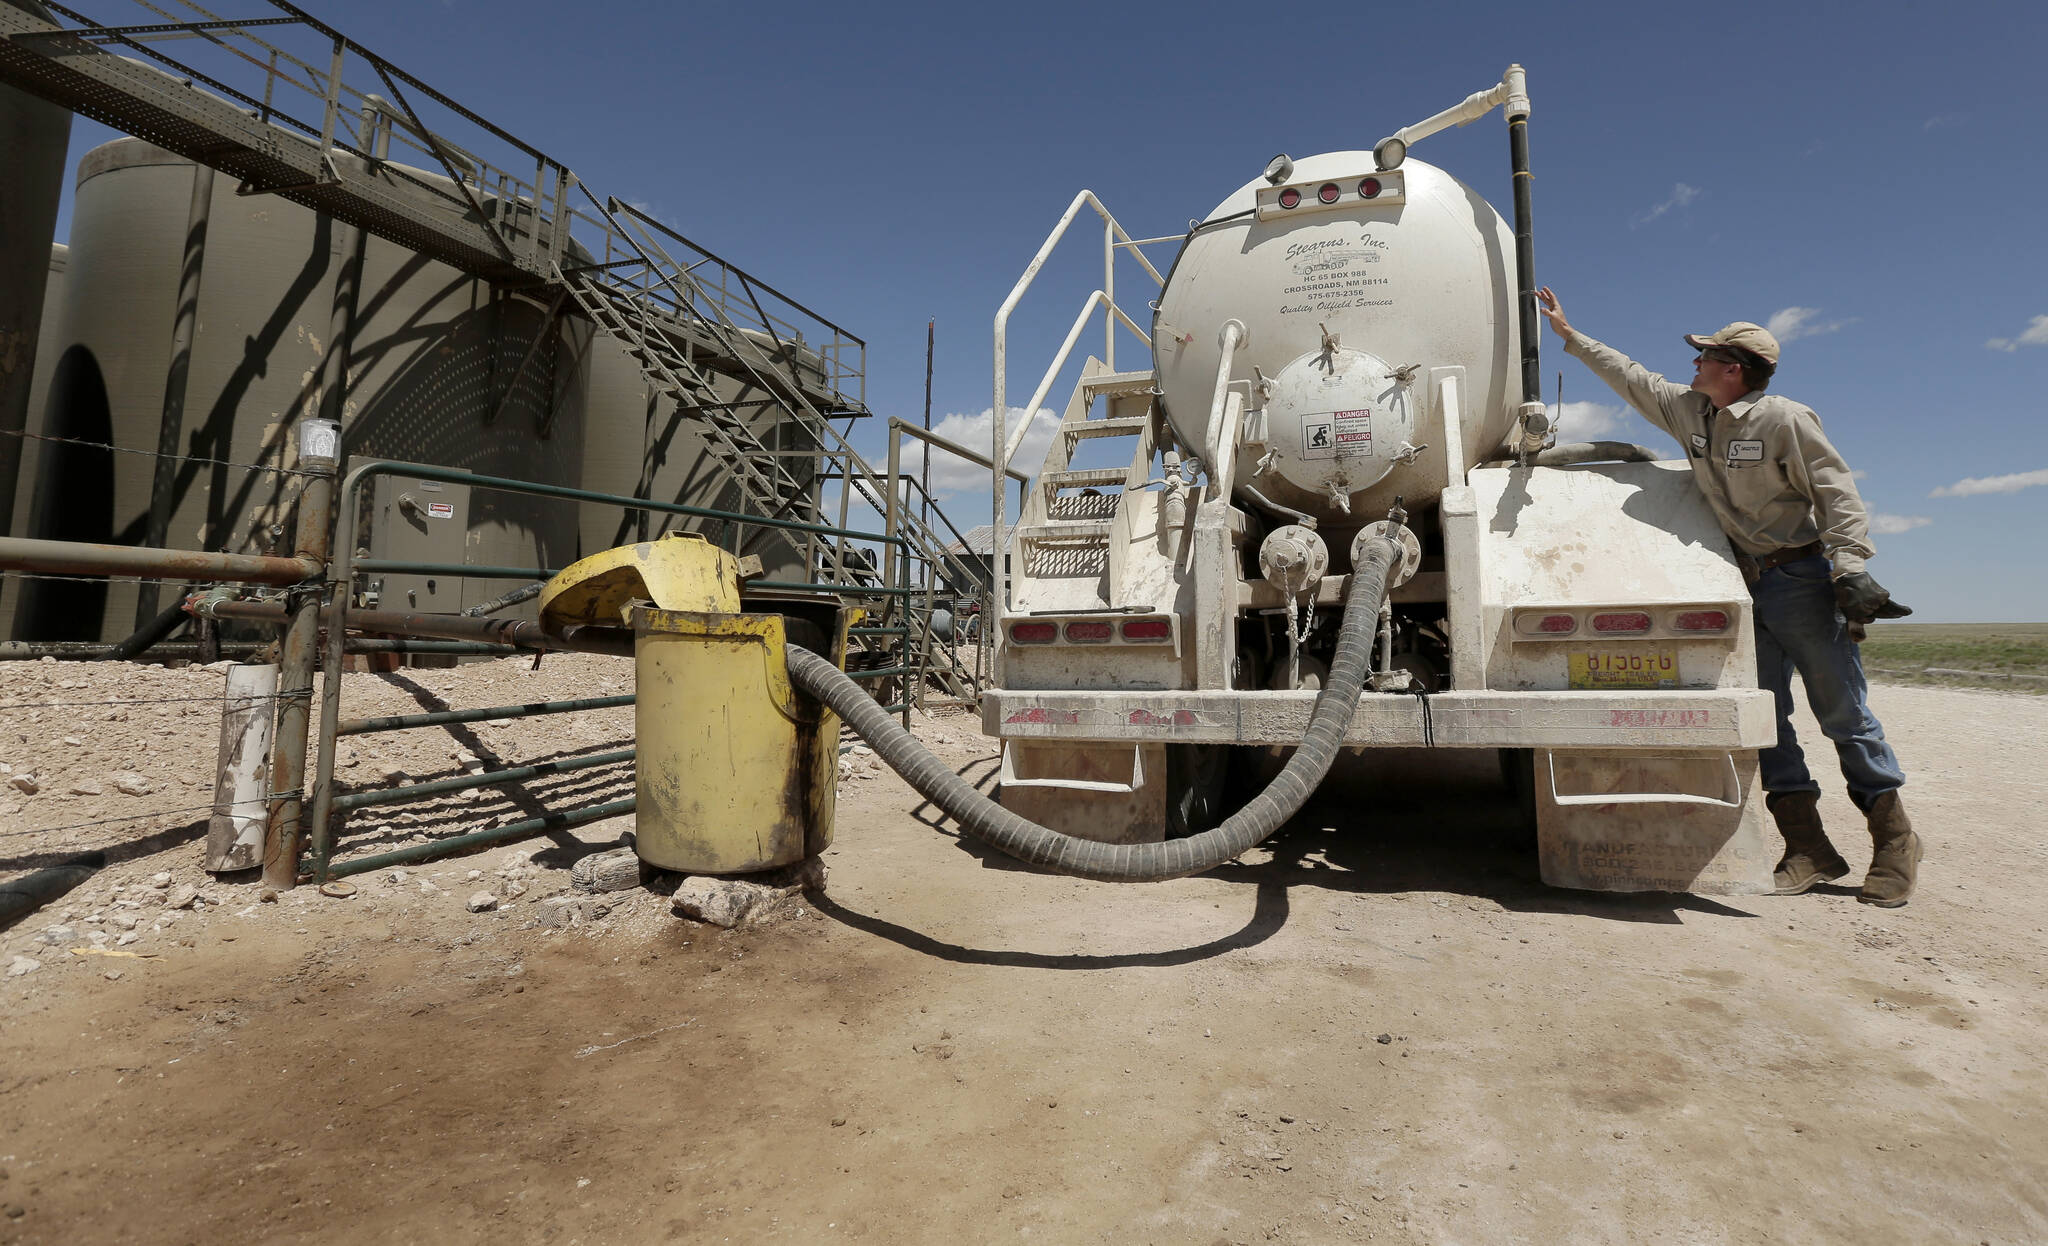 AP Photo/Charlie Riedel, File 
In this April 24, 2015, filephoto, a worker empties oilfield wastewater from a tank truck into storage tanks on Carl and Justin Johnson’s ranch near Crossroads, N.M. Labor shortages, supply problems and volatile prices have made oil companies cautious about new drilling even as U.S. politicians push for increased production.